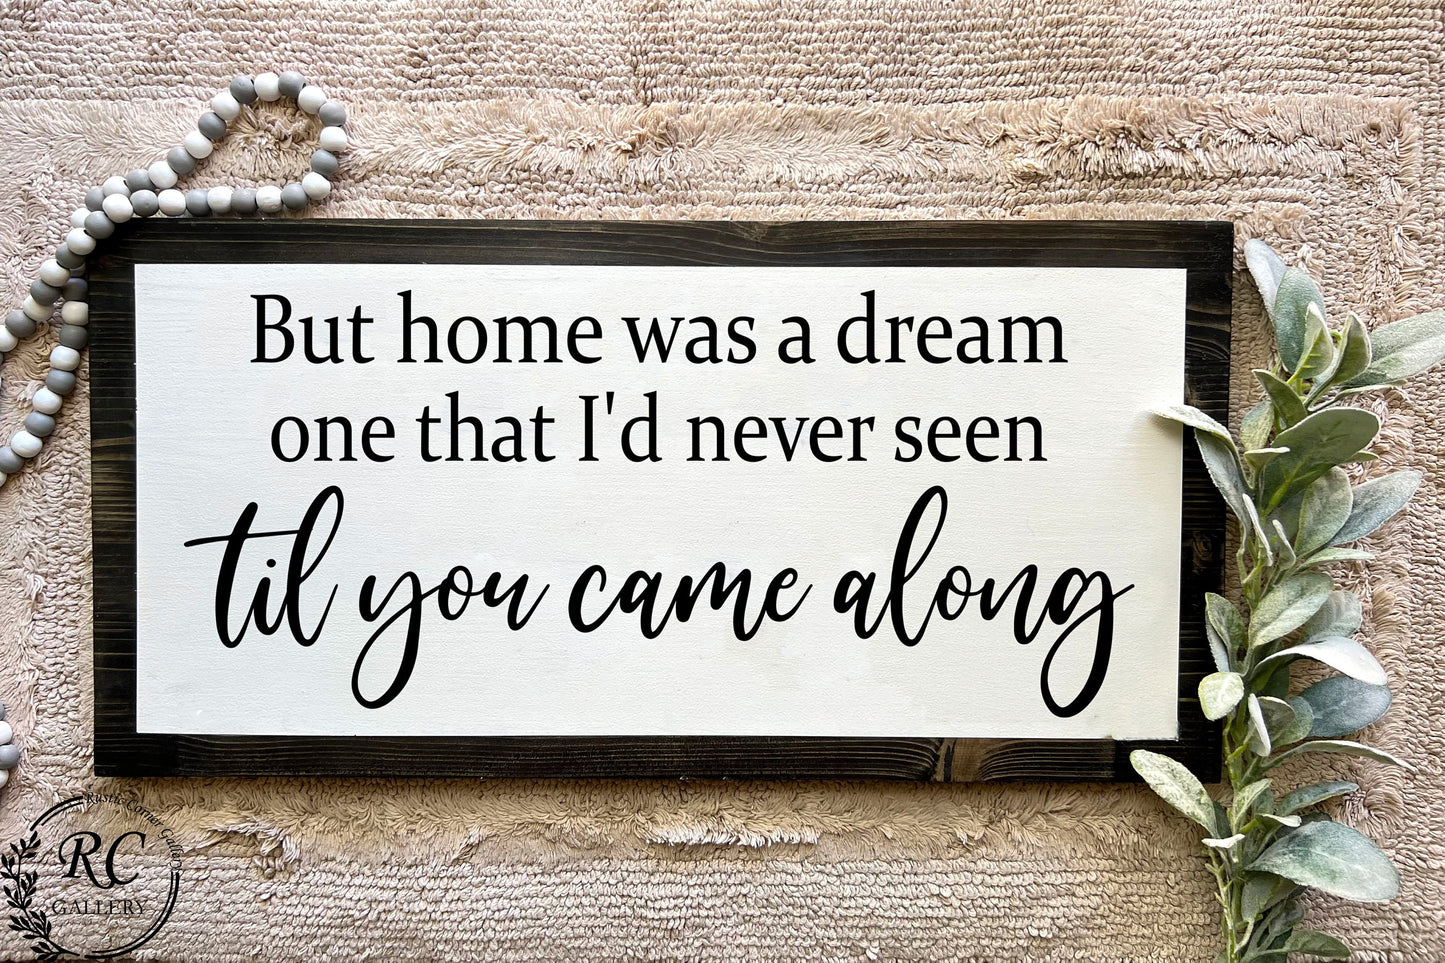 Home was a dream one that I'd never seen til you came along wood sign.